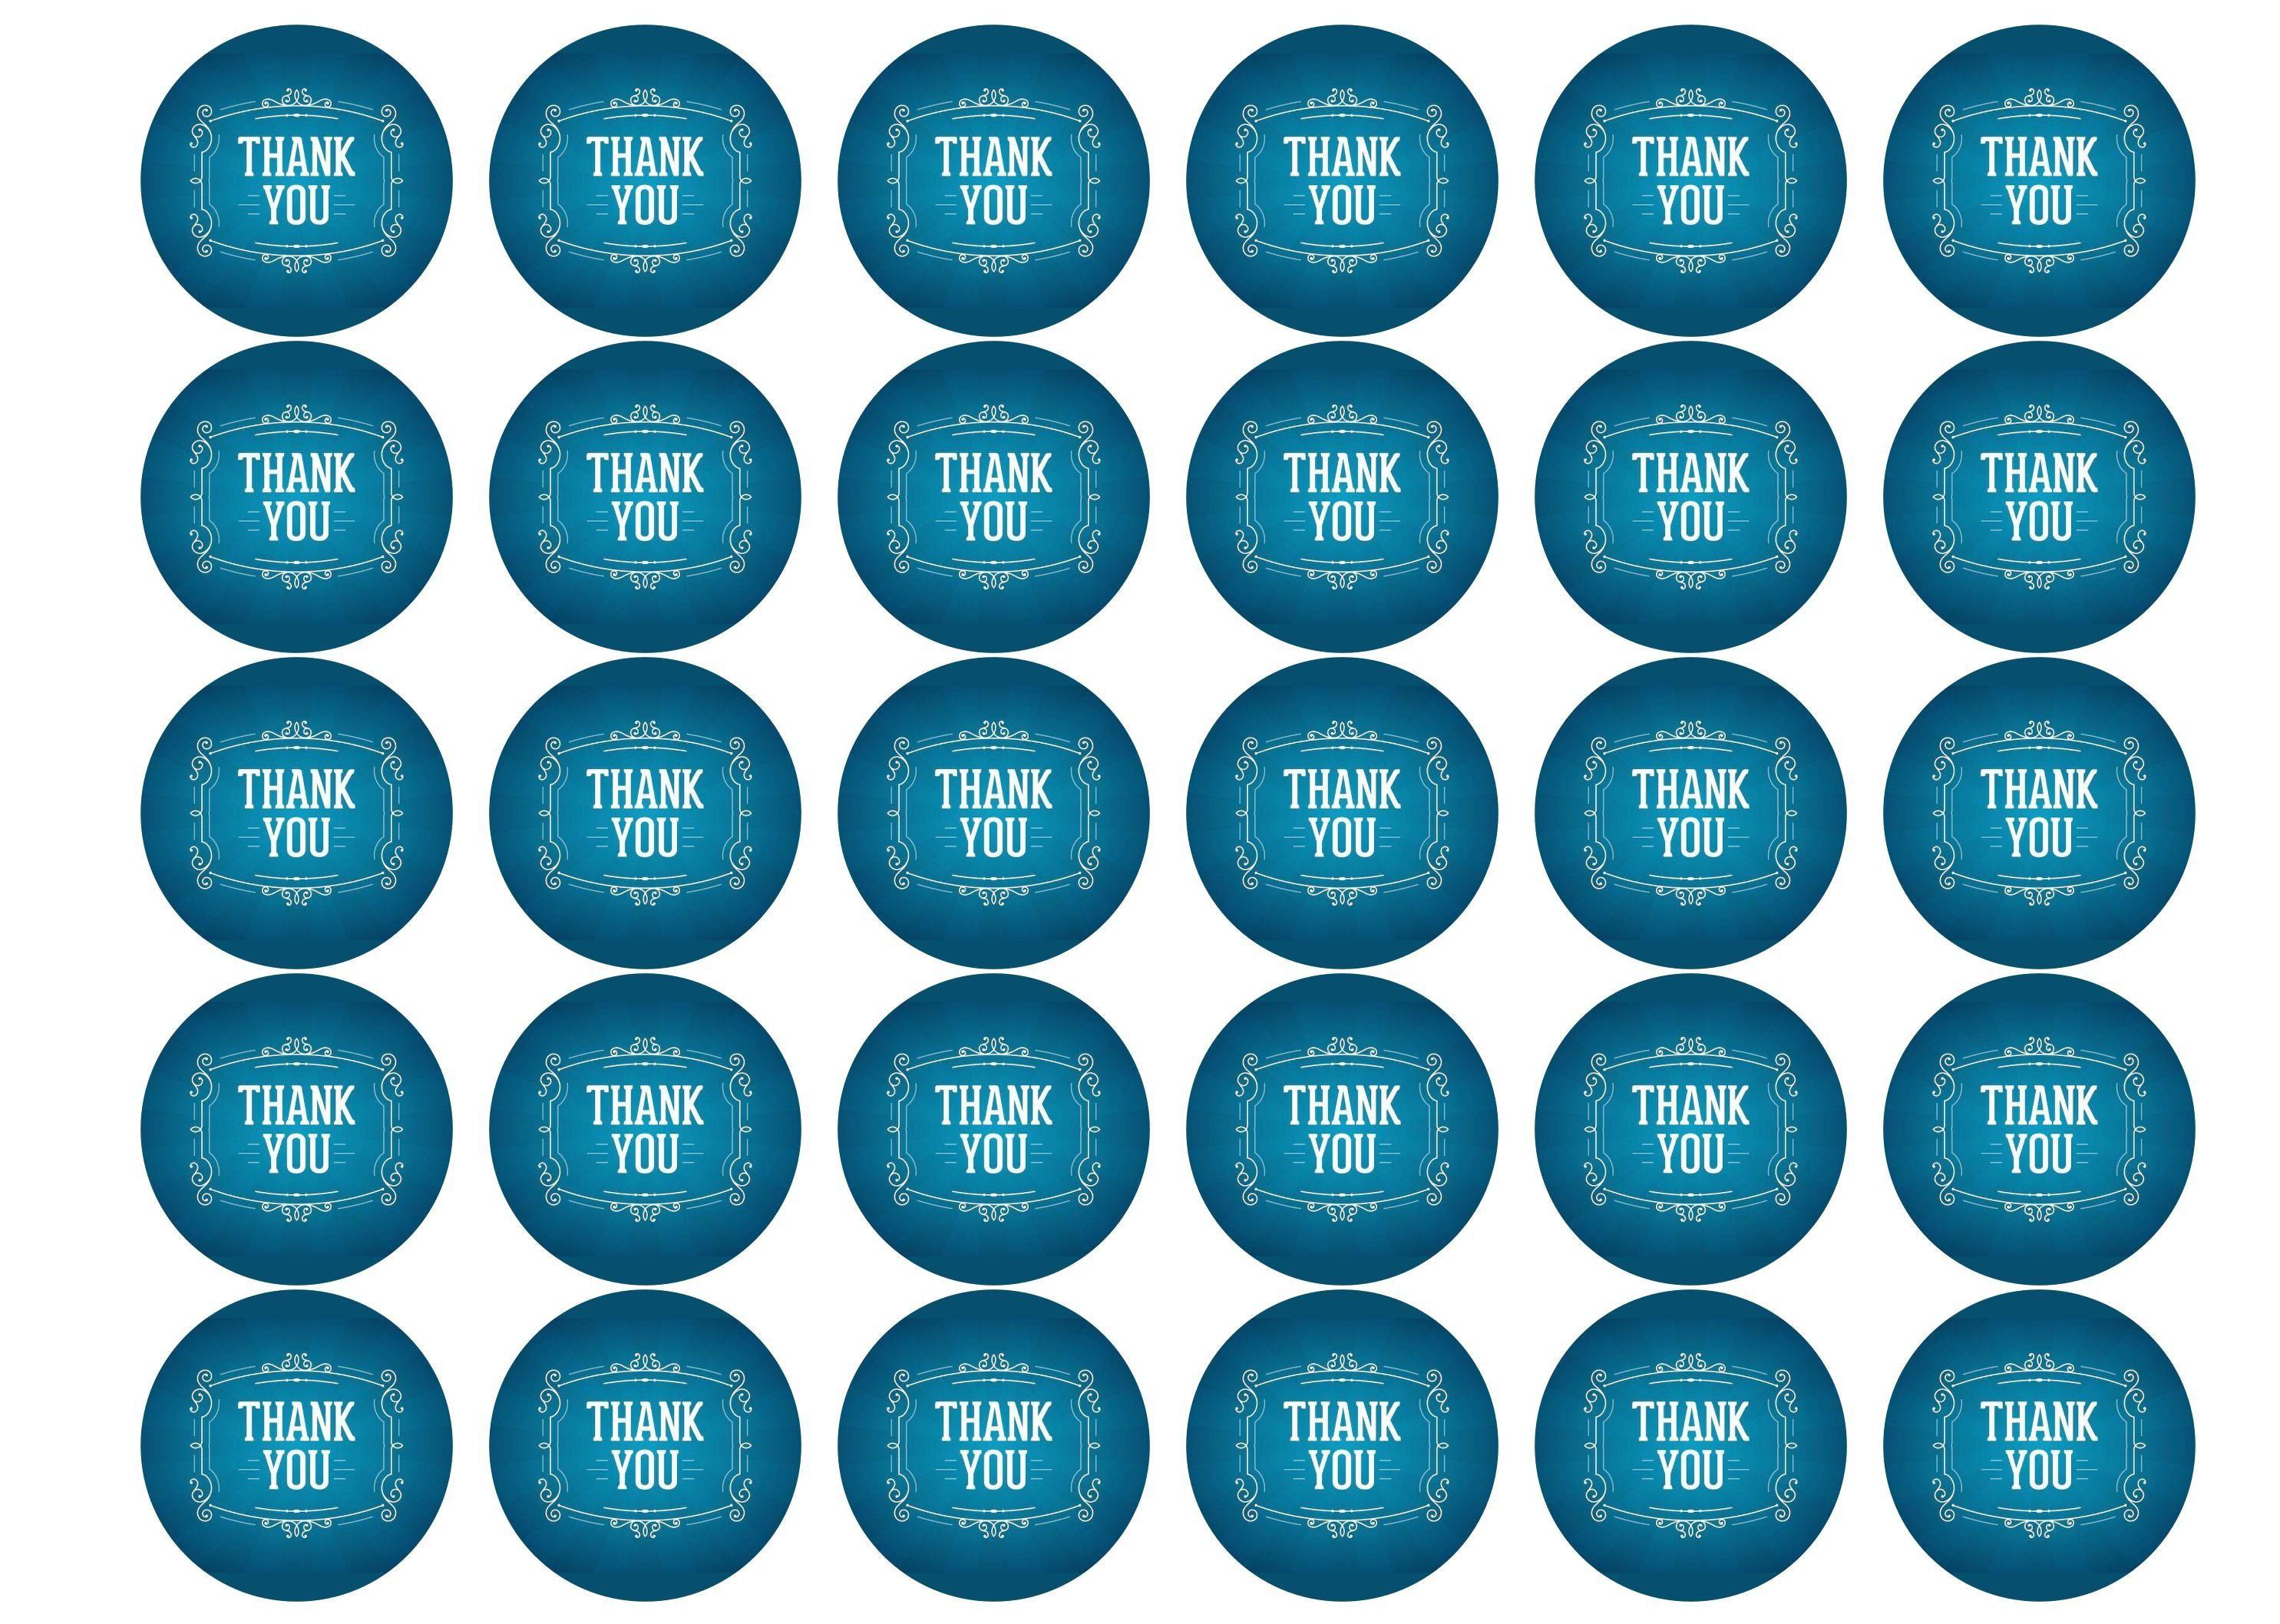 Printed edible cupcake toppers - thank you in blue